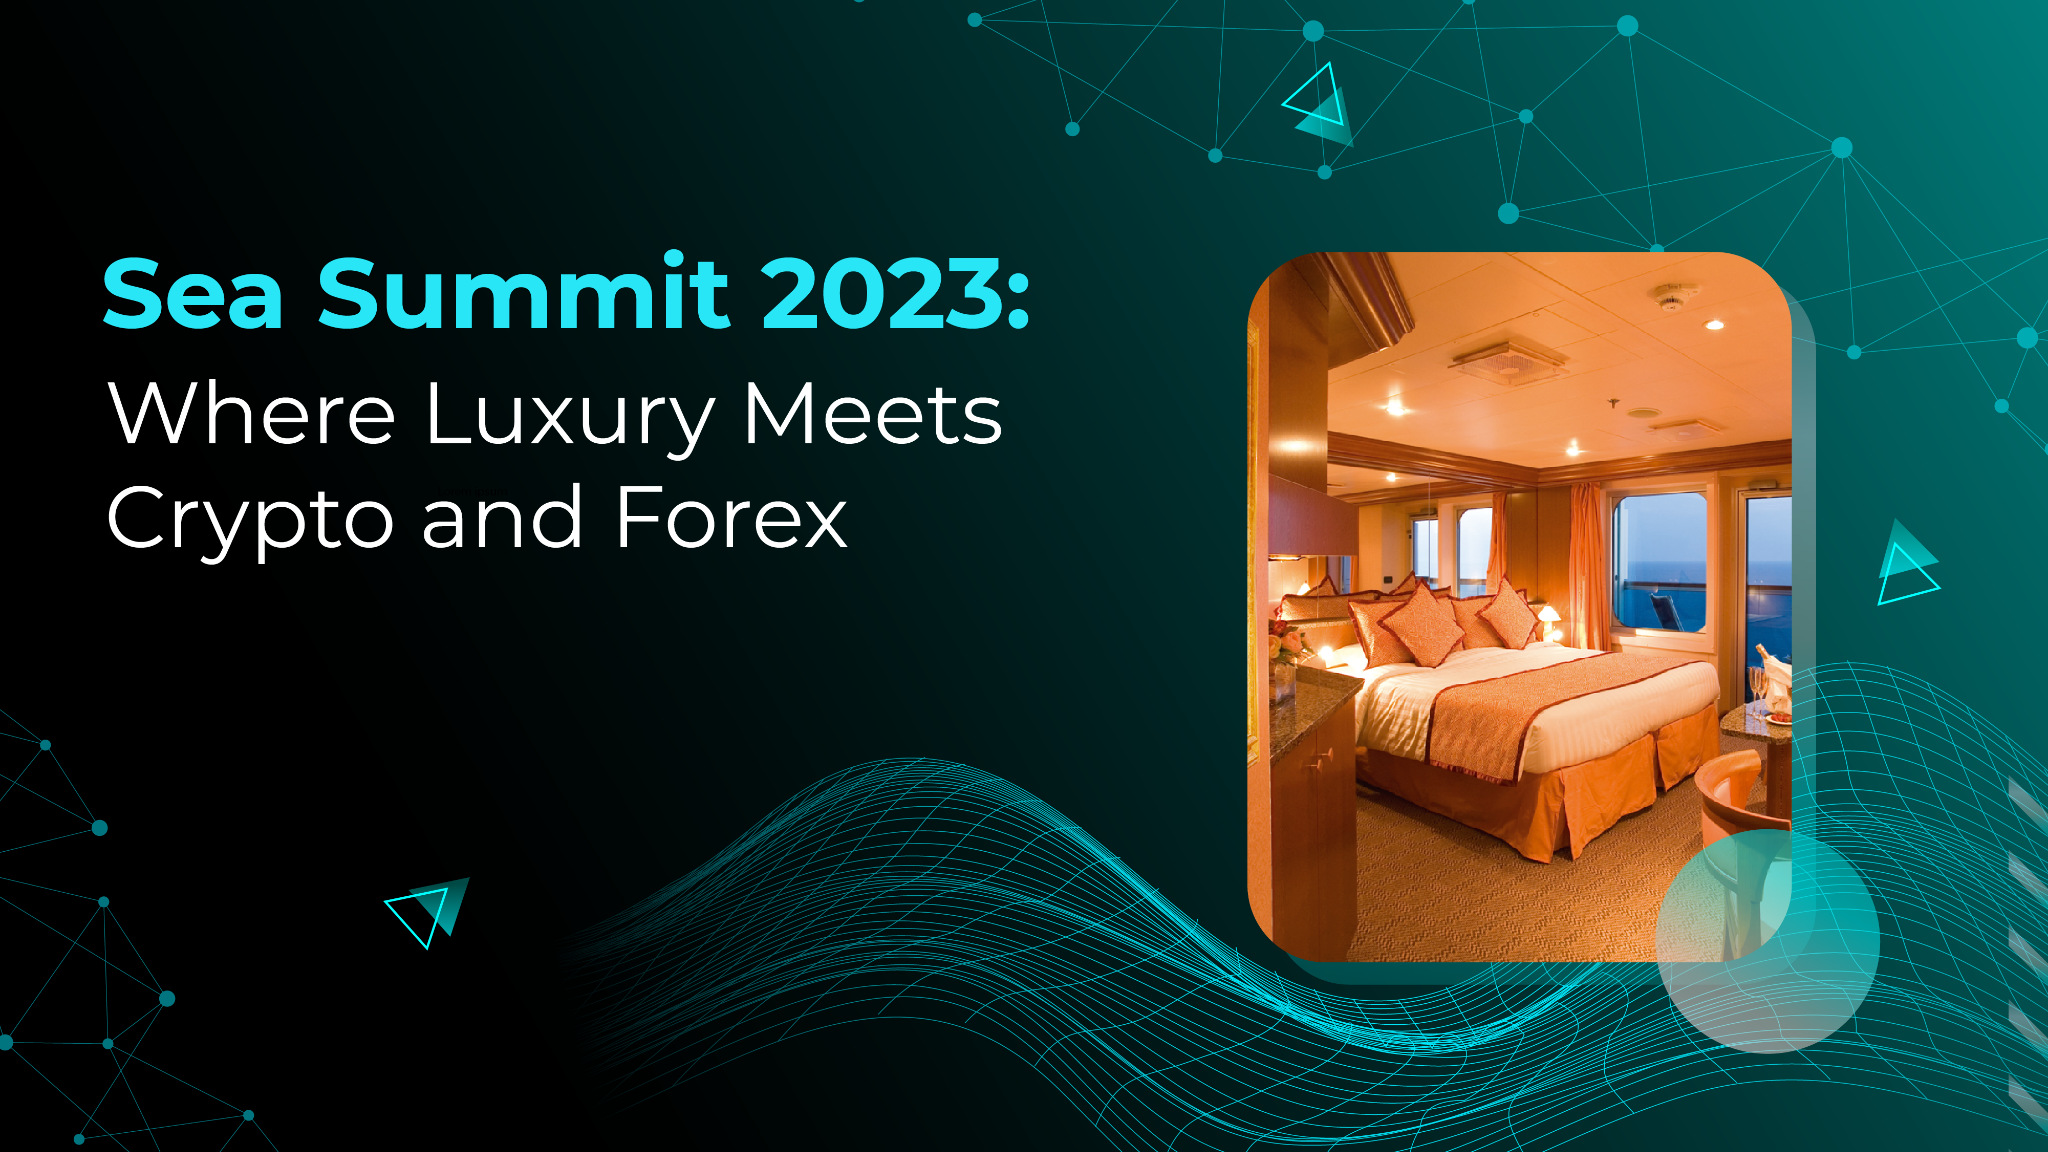 Sea Summit 2023: Where Luxury Meets Crypto and Forex